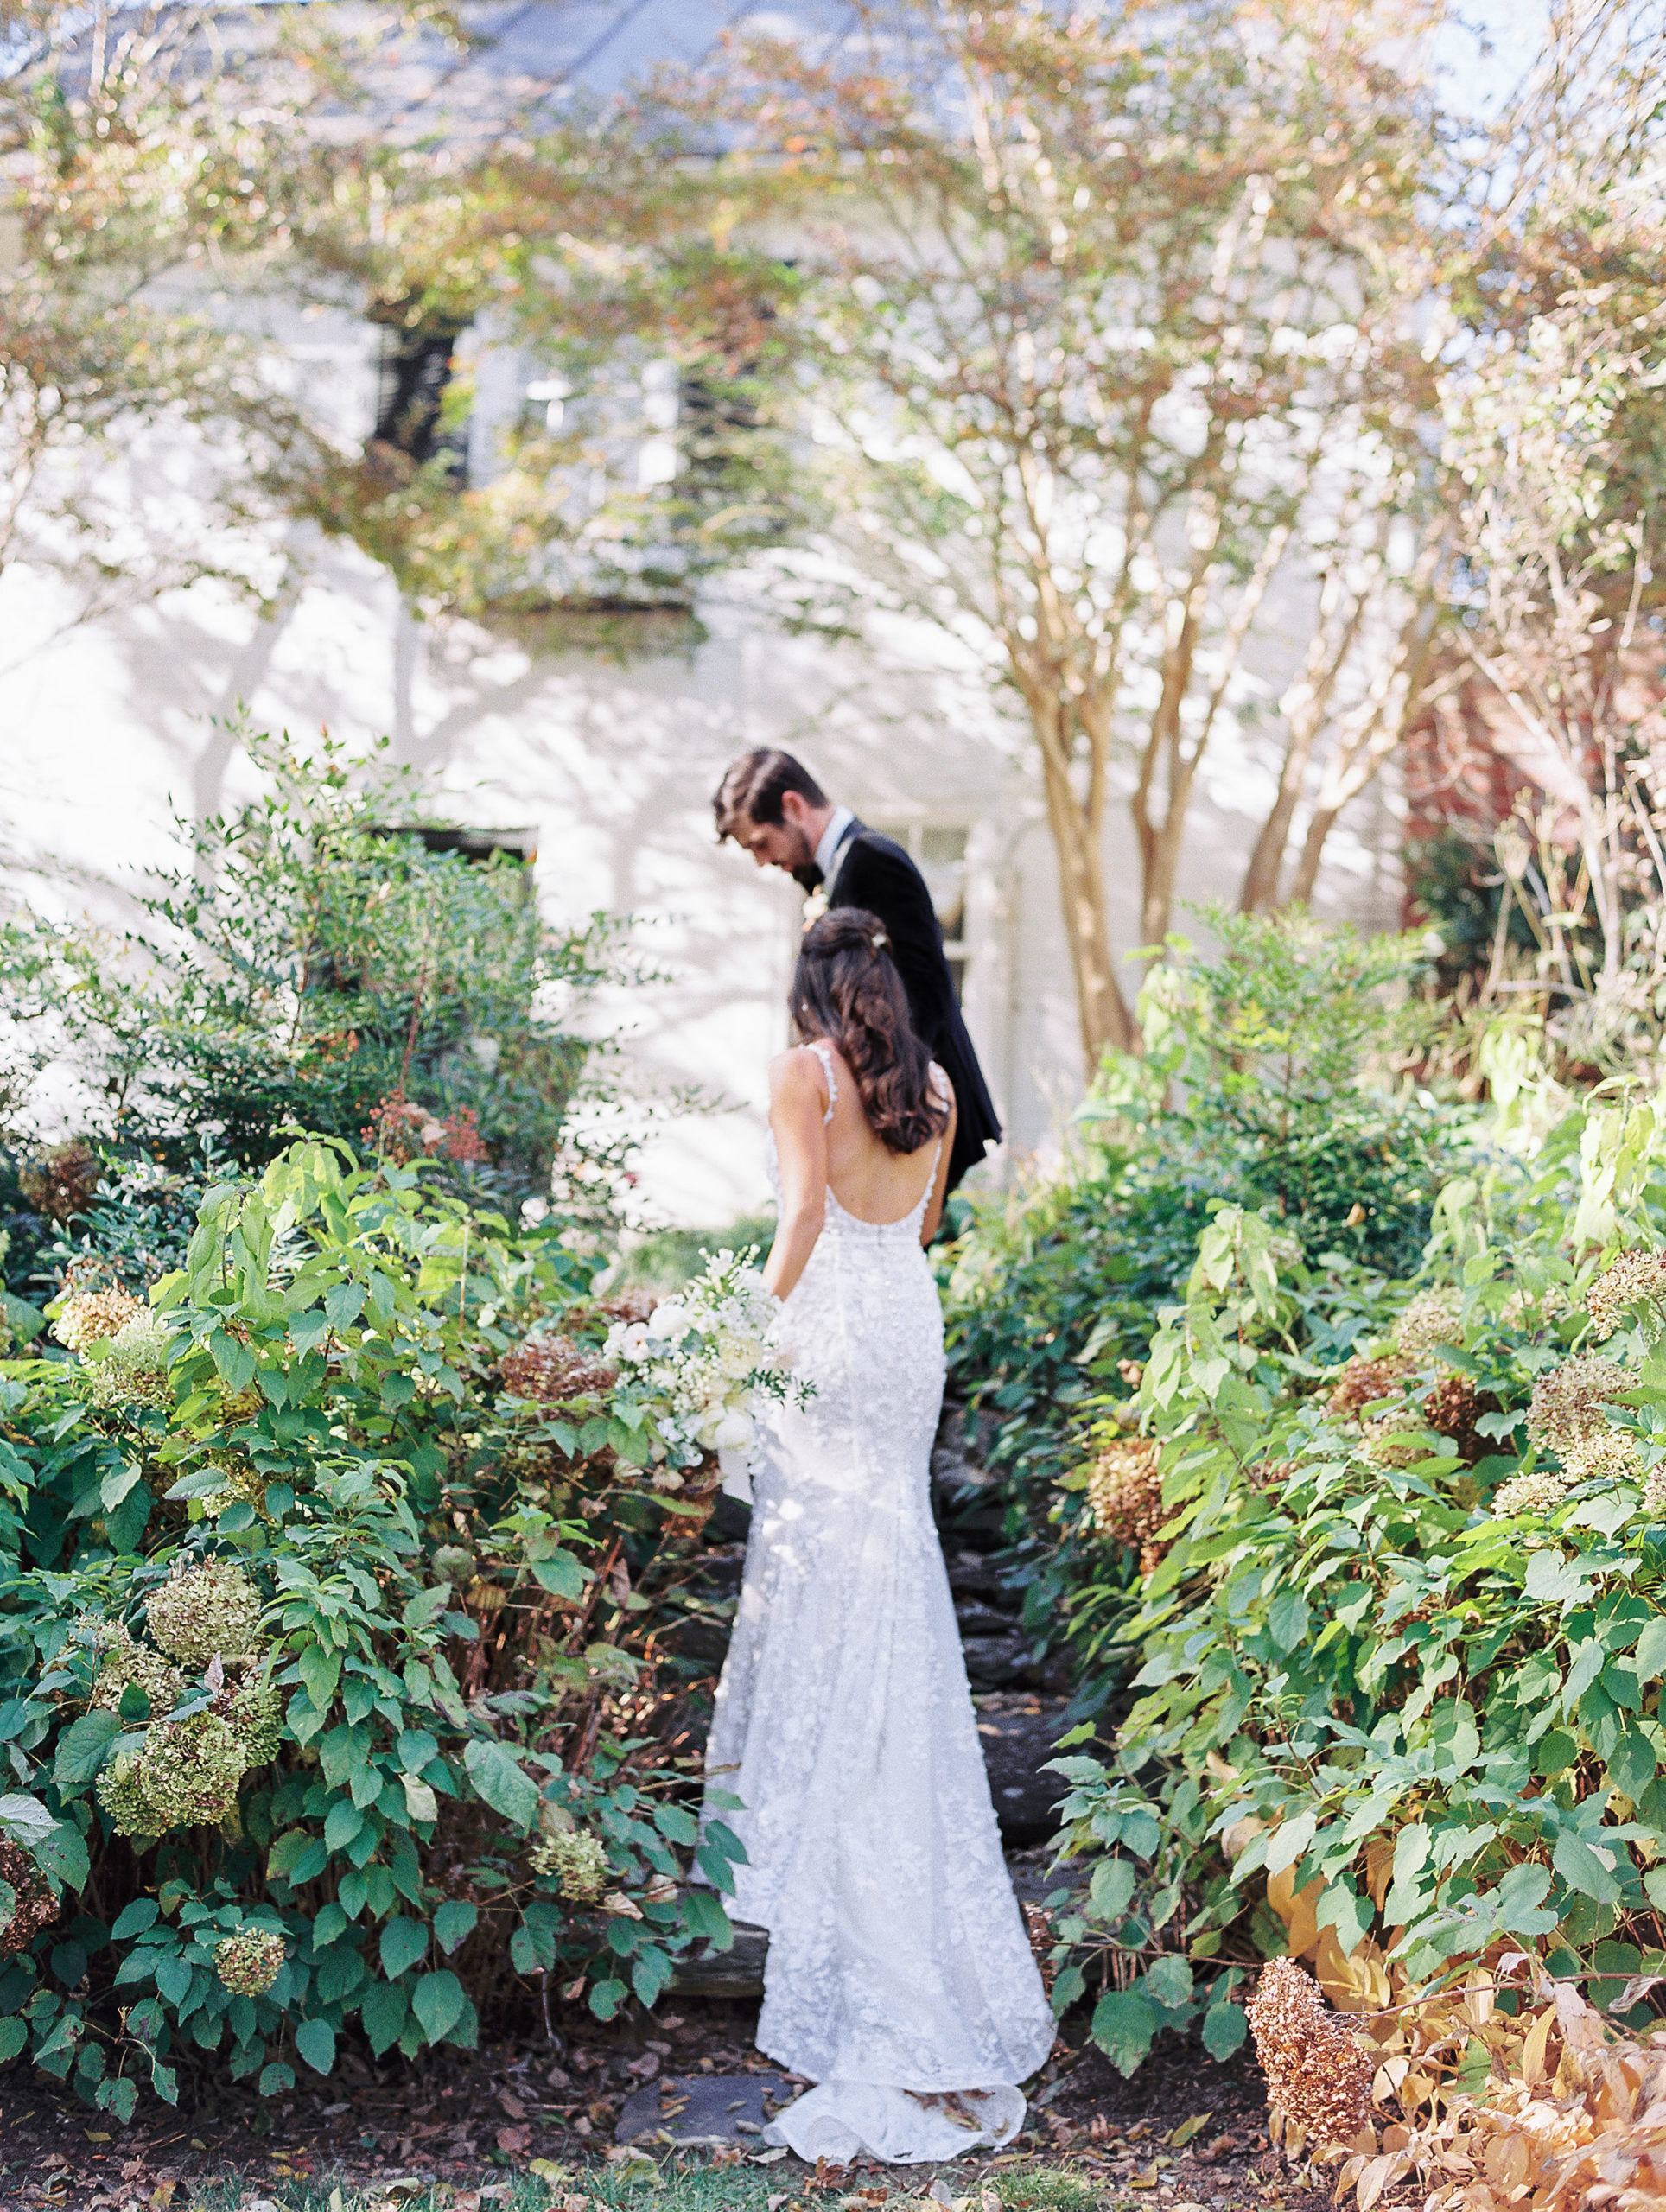 Groom leads bride up stone stairs in garden for Clifton wedding photography